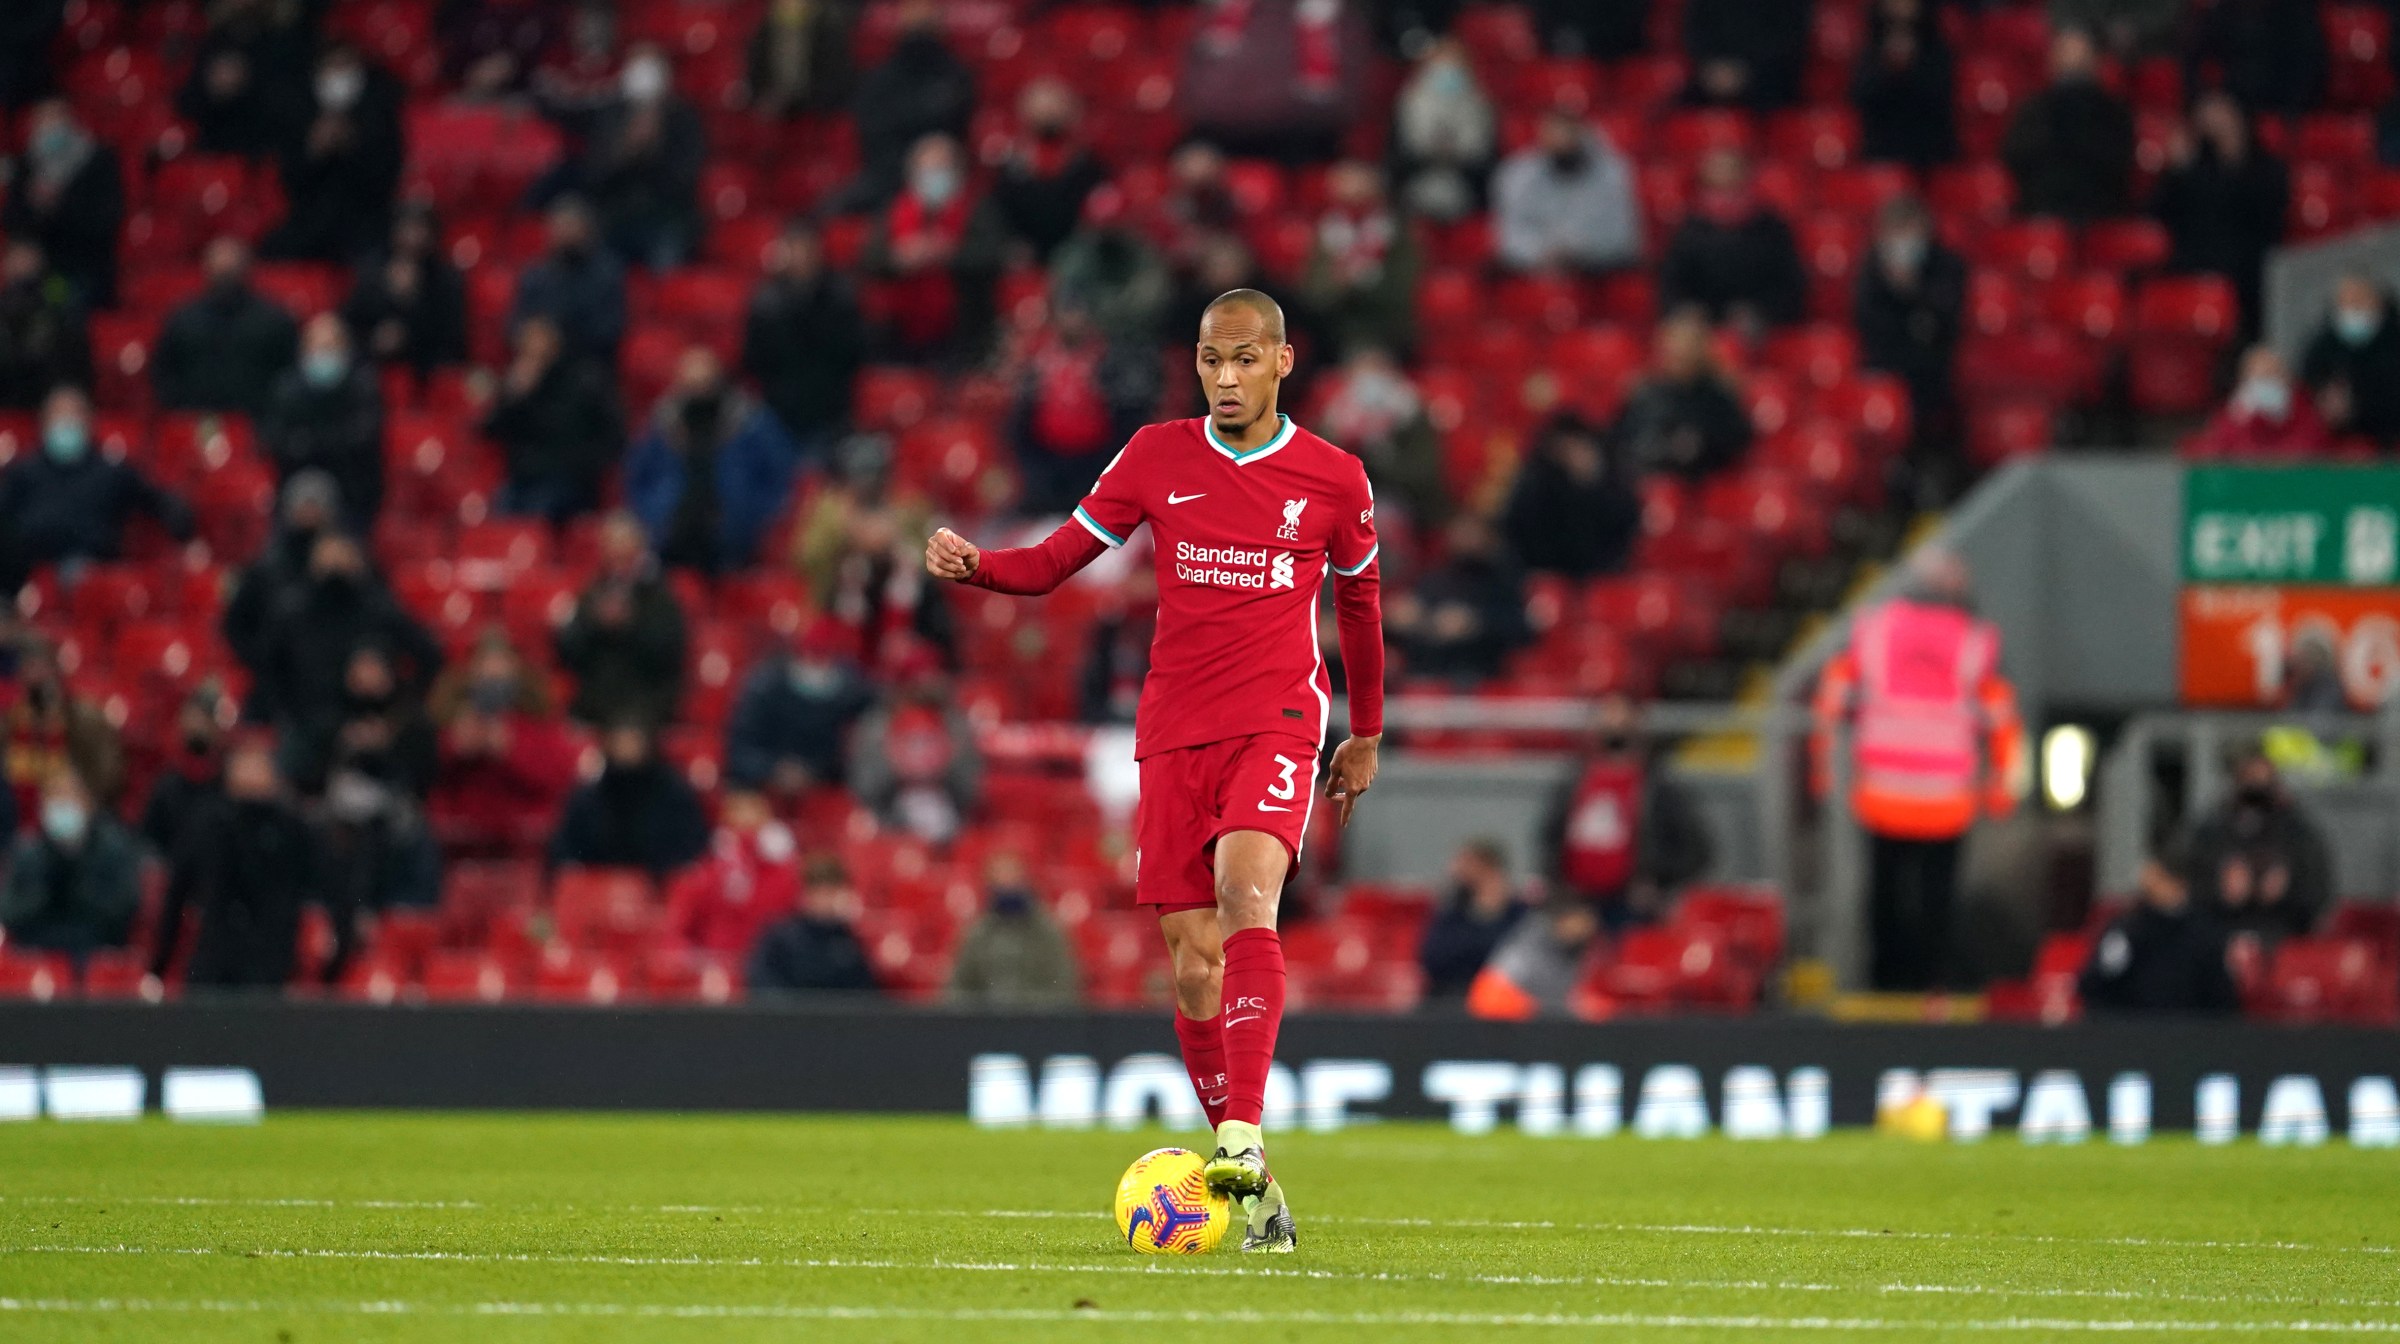 Fabinho of Liverpool in action during the Premier League match between Liverpool and Wolverhampton Wanderers at Anfield on December 06, 2020 in Liverpool, England.